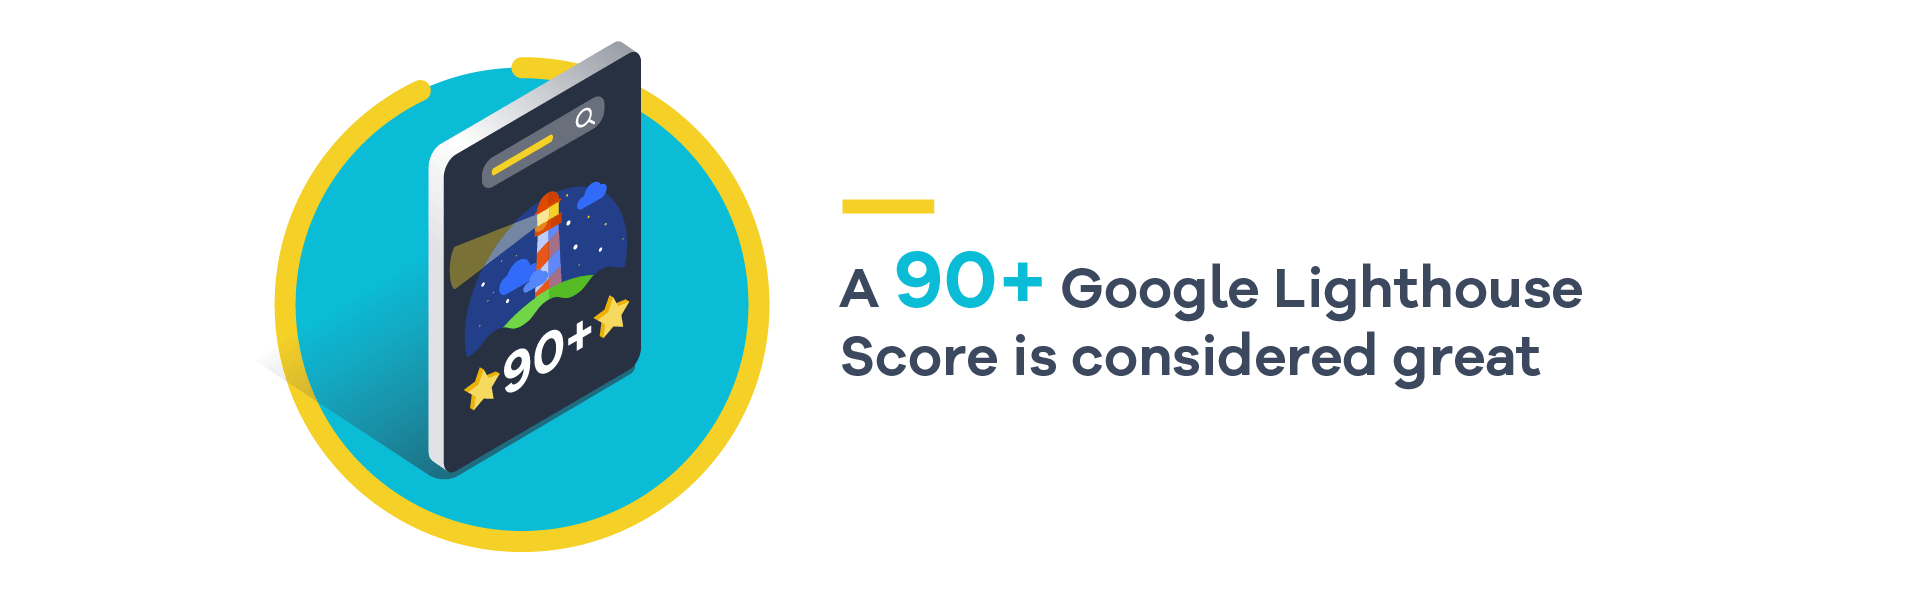 90+ Score is Considered Great